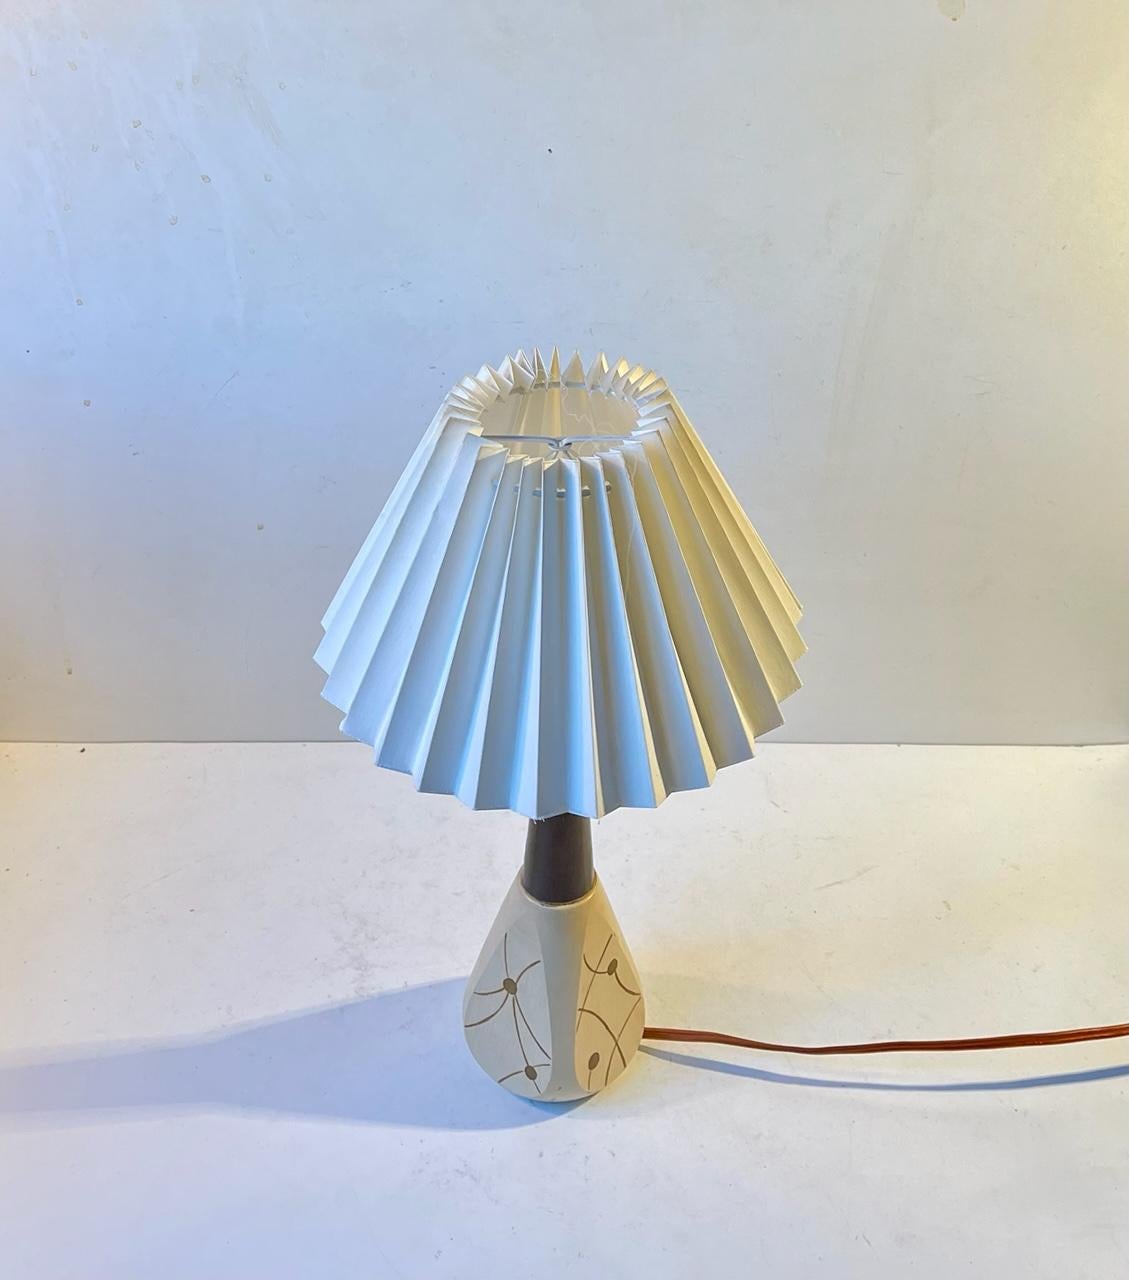 Italian Atomic Table Lamp with Brass Accents, 1950s In Good Condition For Sale In Esbjerg, DK